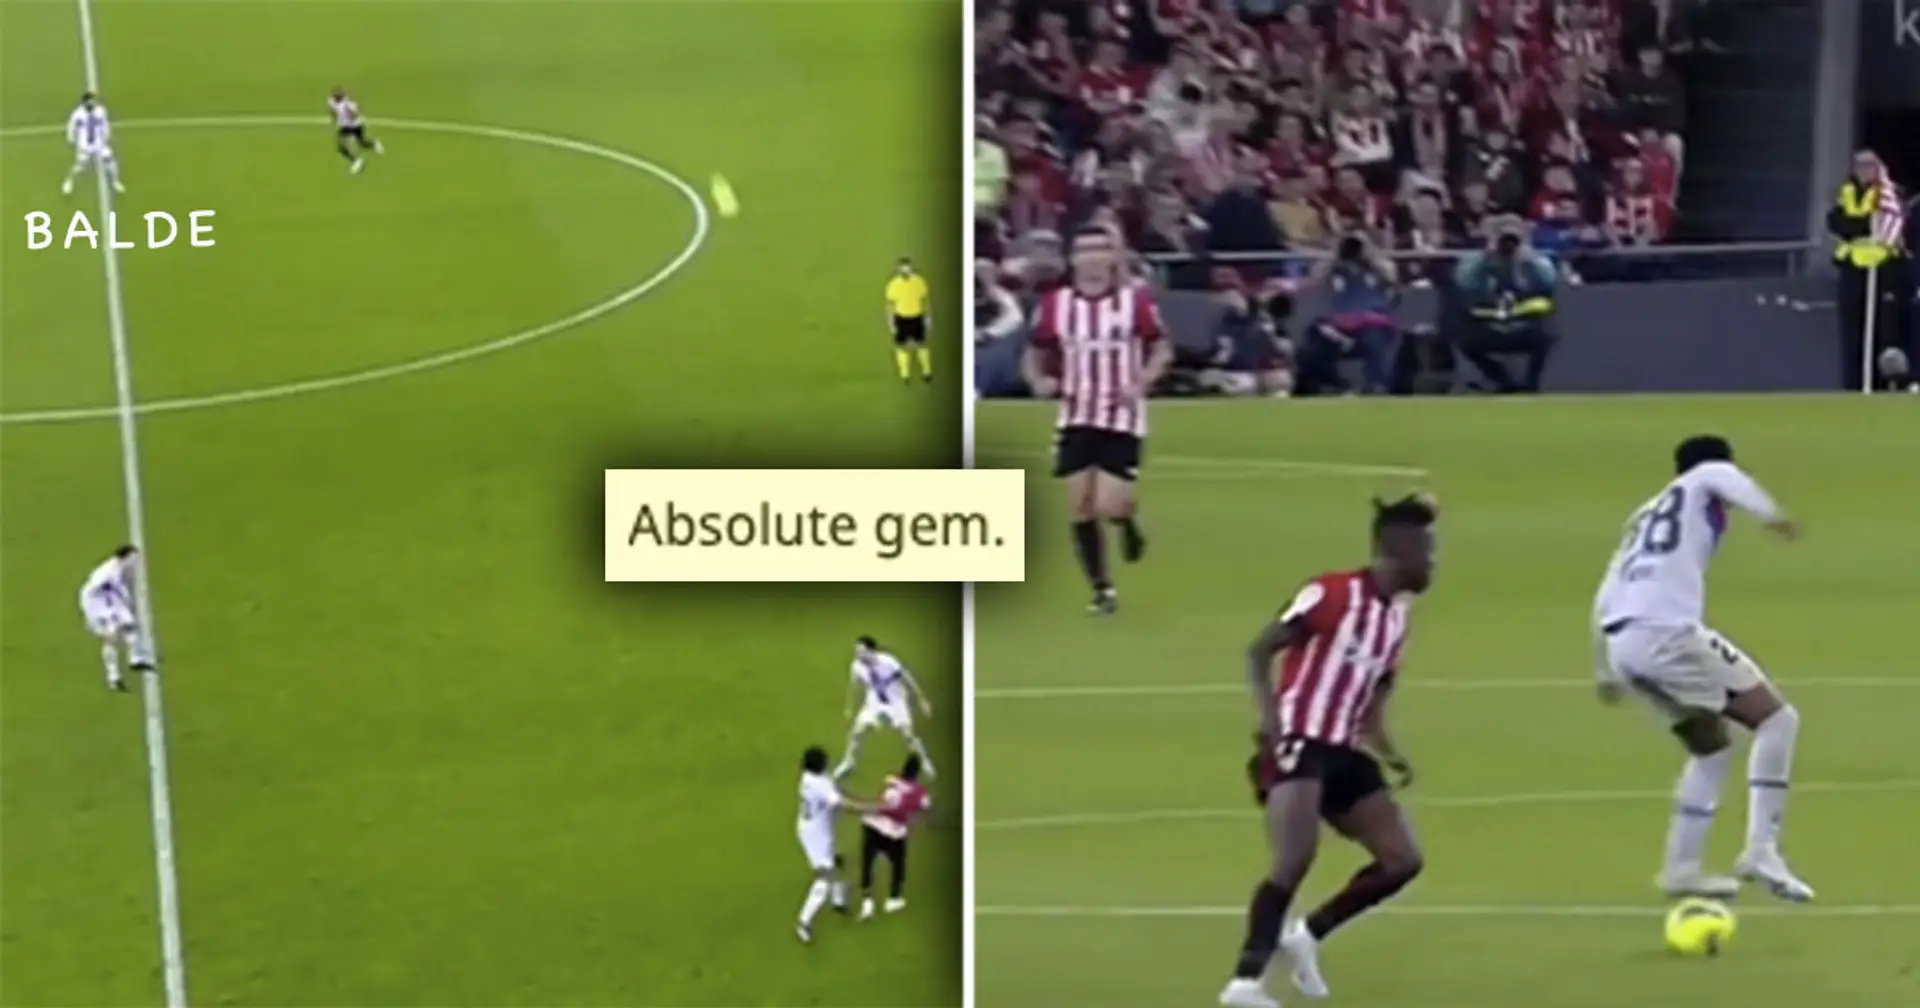 'Some players would break ankles doing that': One Balde episode from Bilbao win goes viral